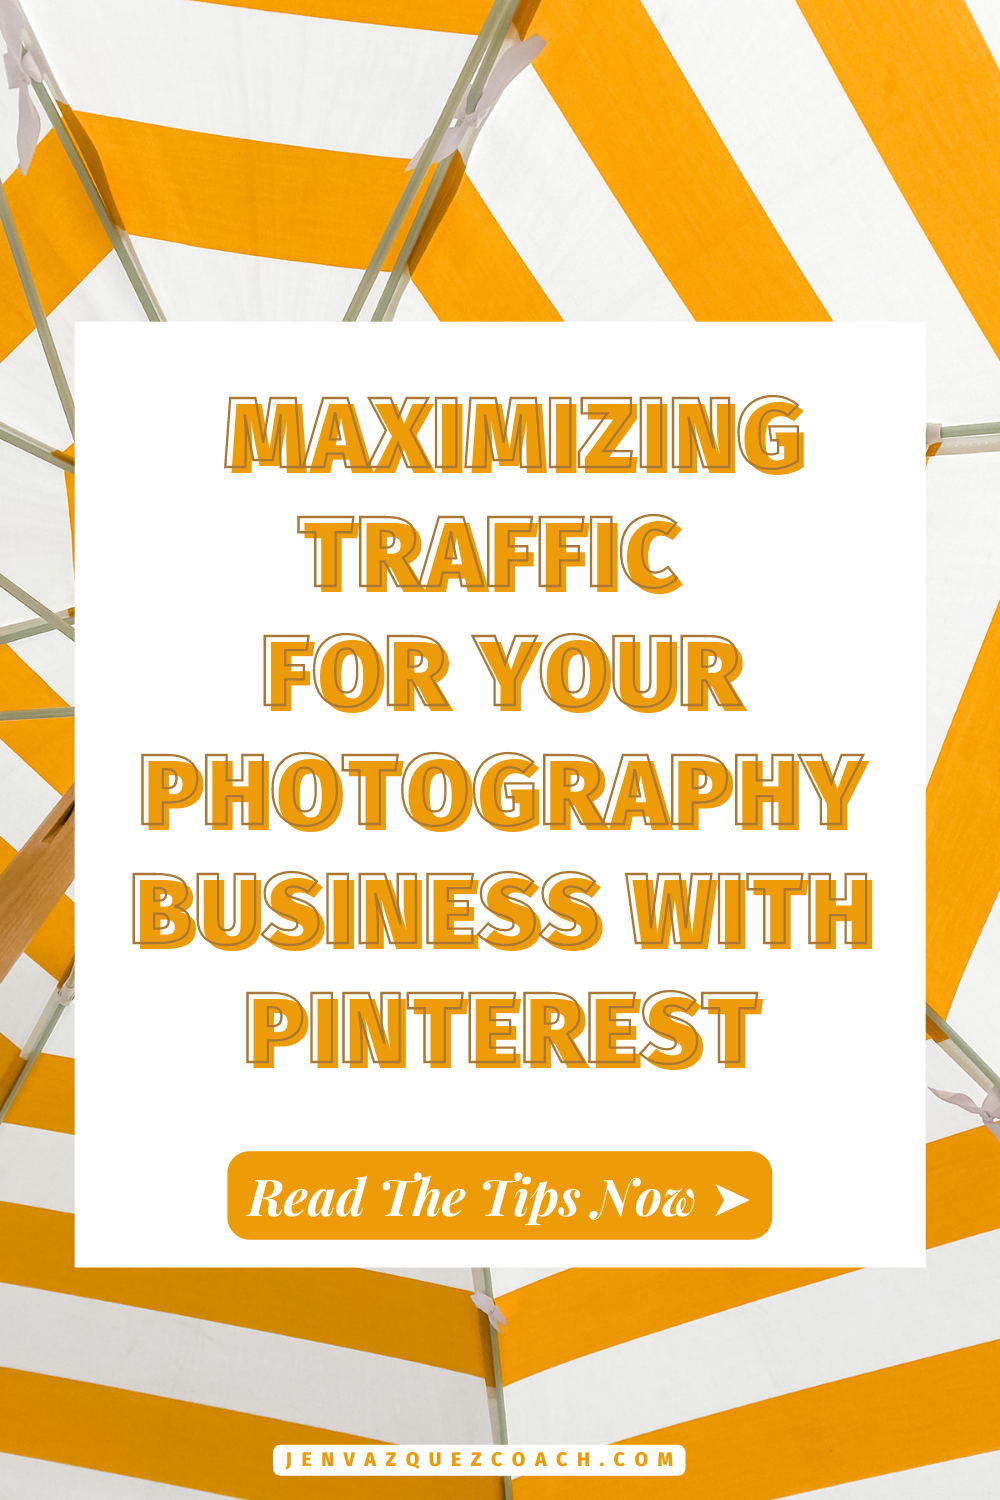 Maximizing Your Photography Business growth with Pinterest-  How a Pinterest Expert and Photographer Can Help You Save Time and Money 